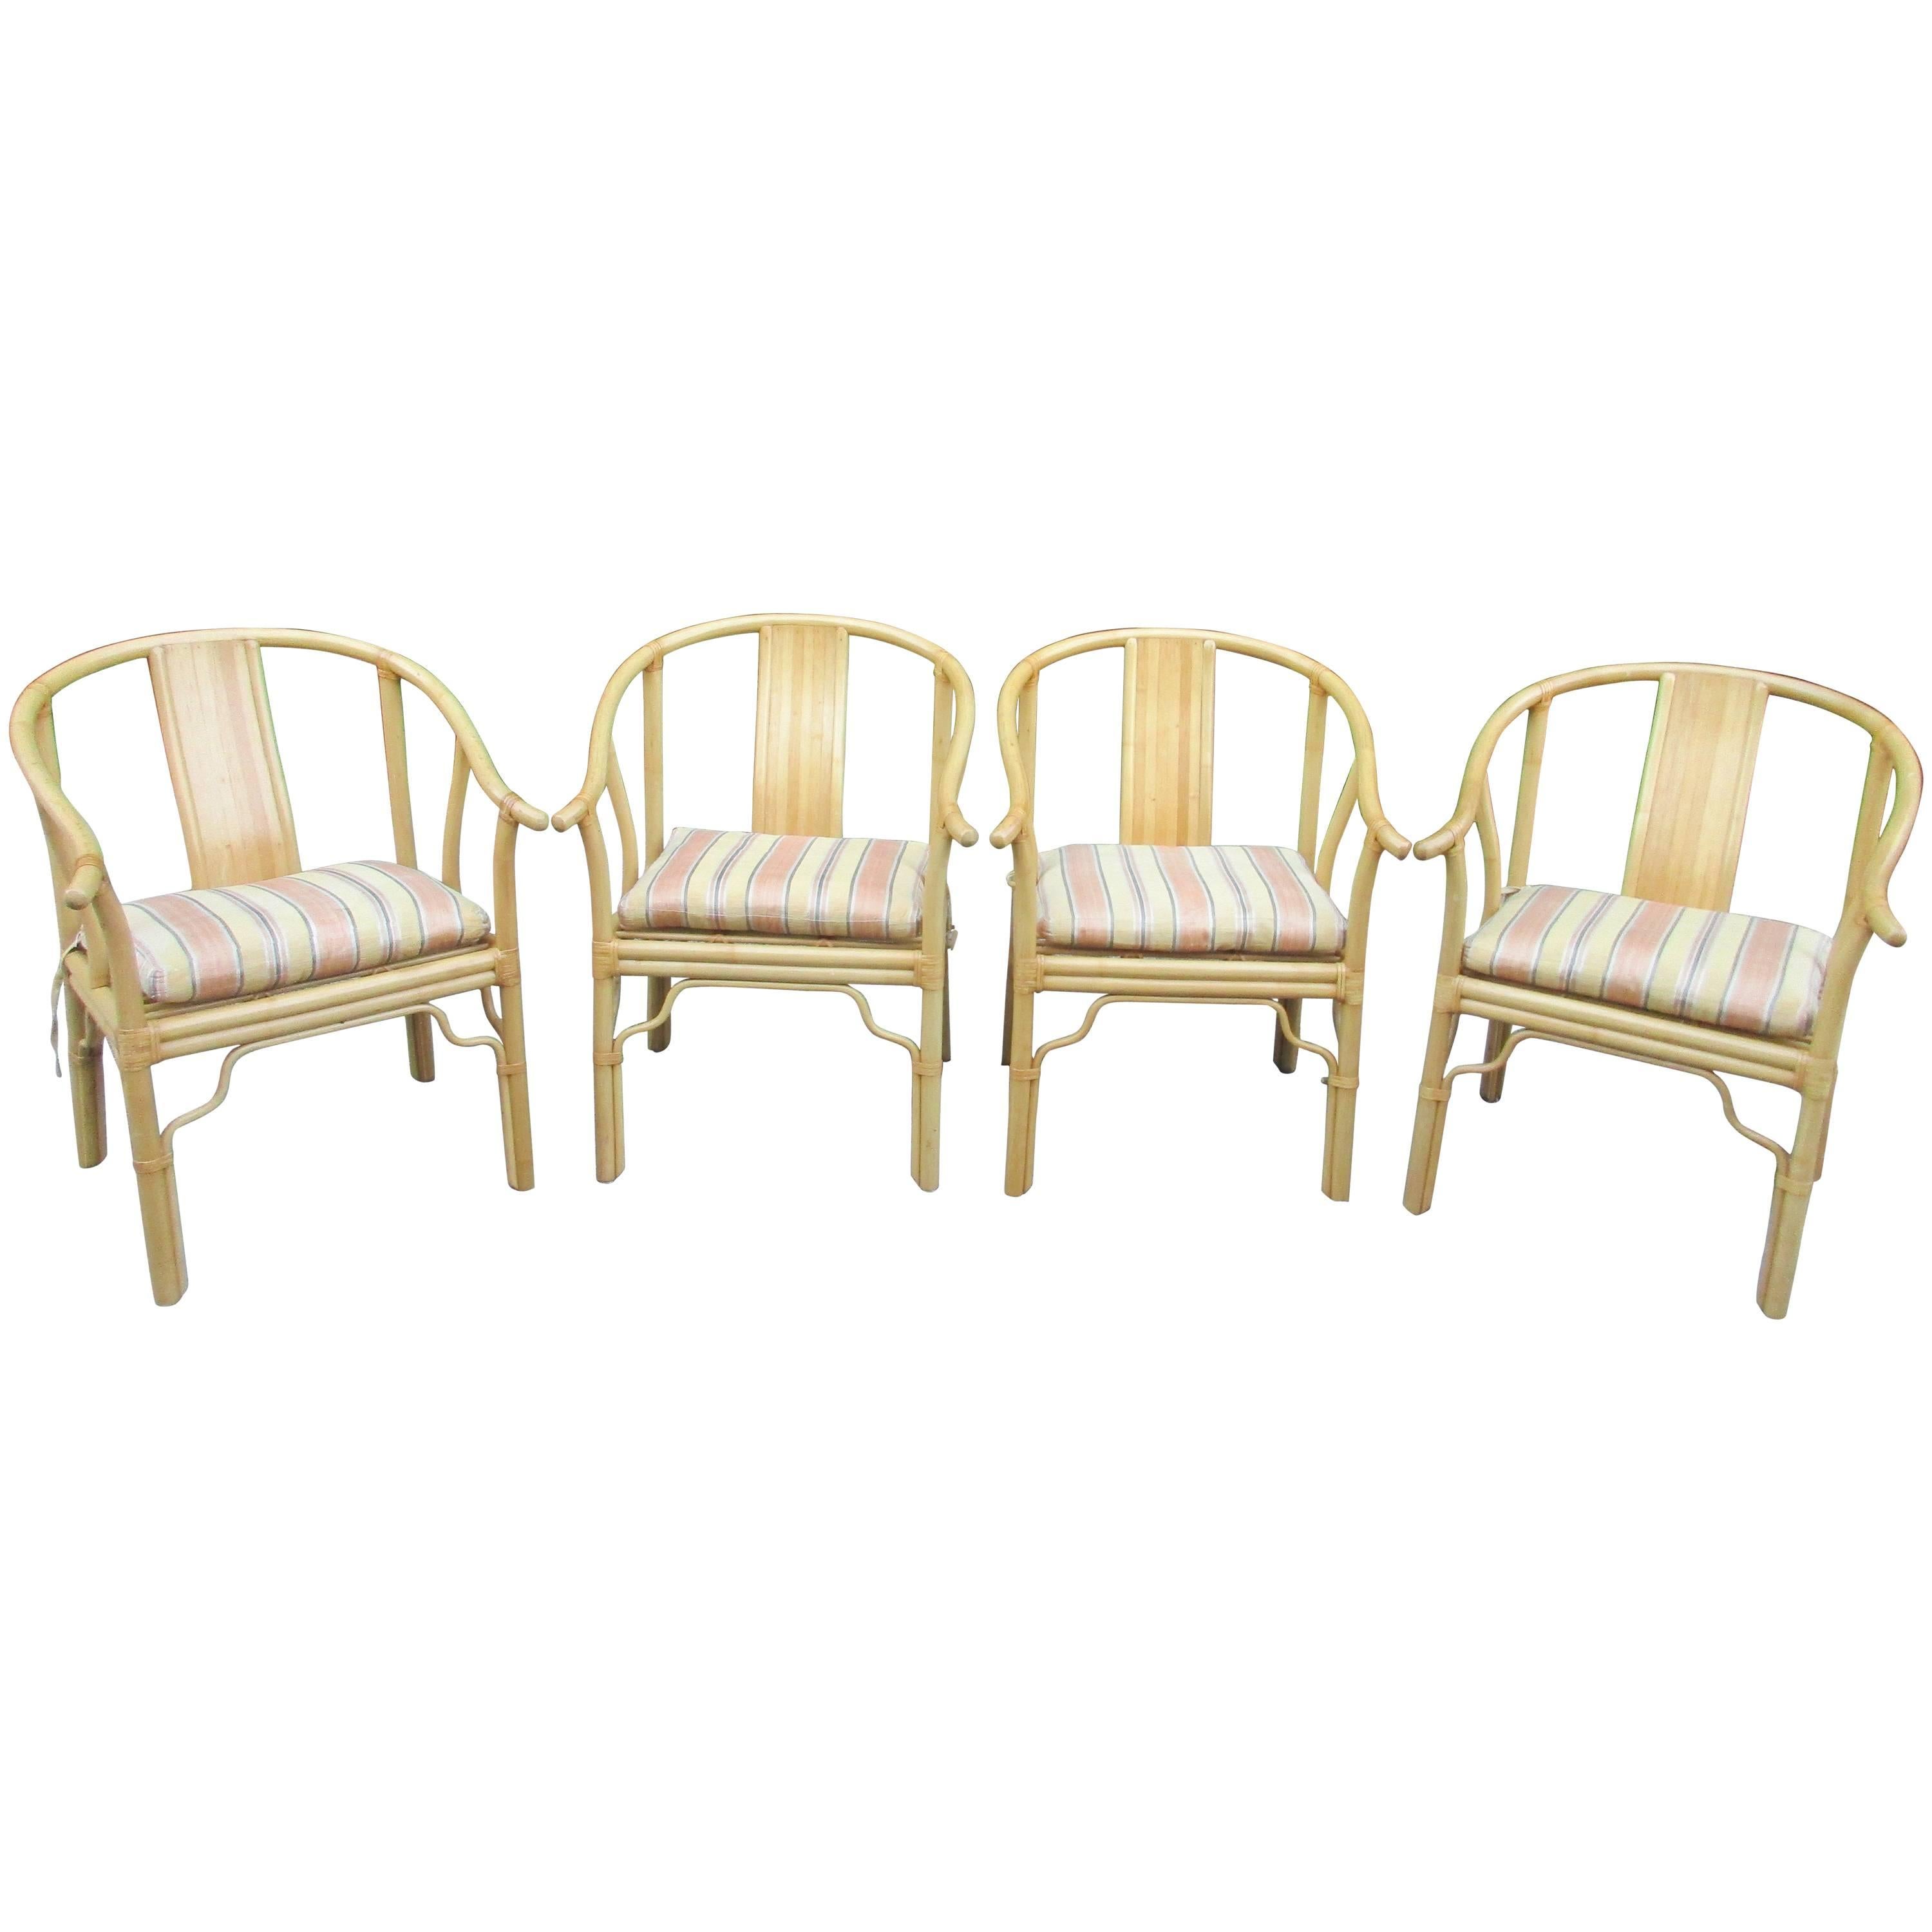 Four Vintage Bamboo Armchairs with Custom Cushions